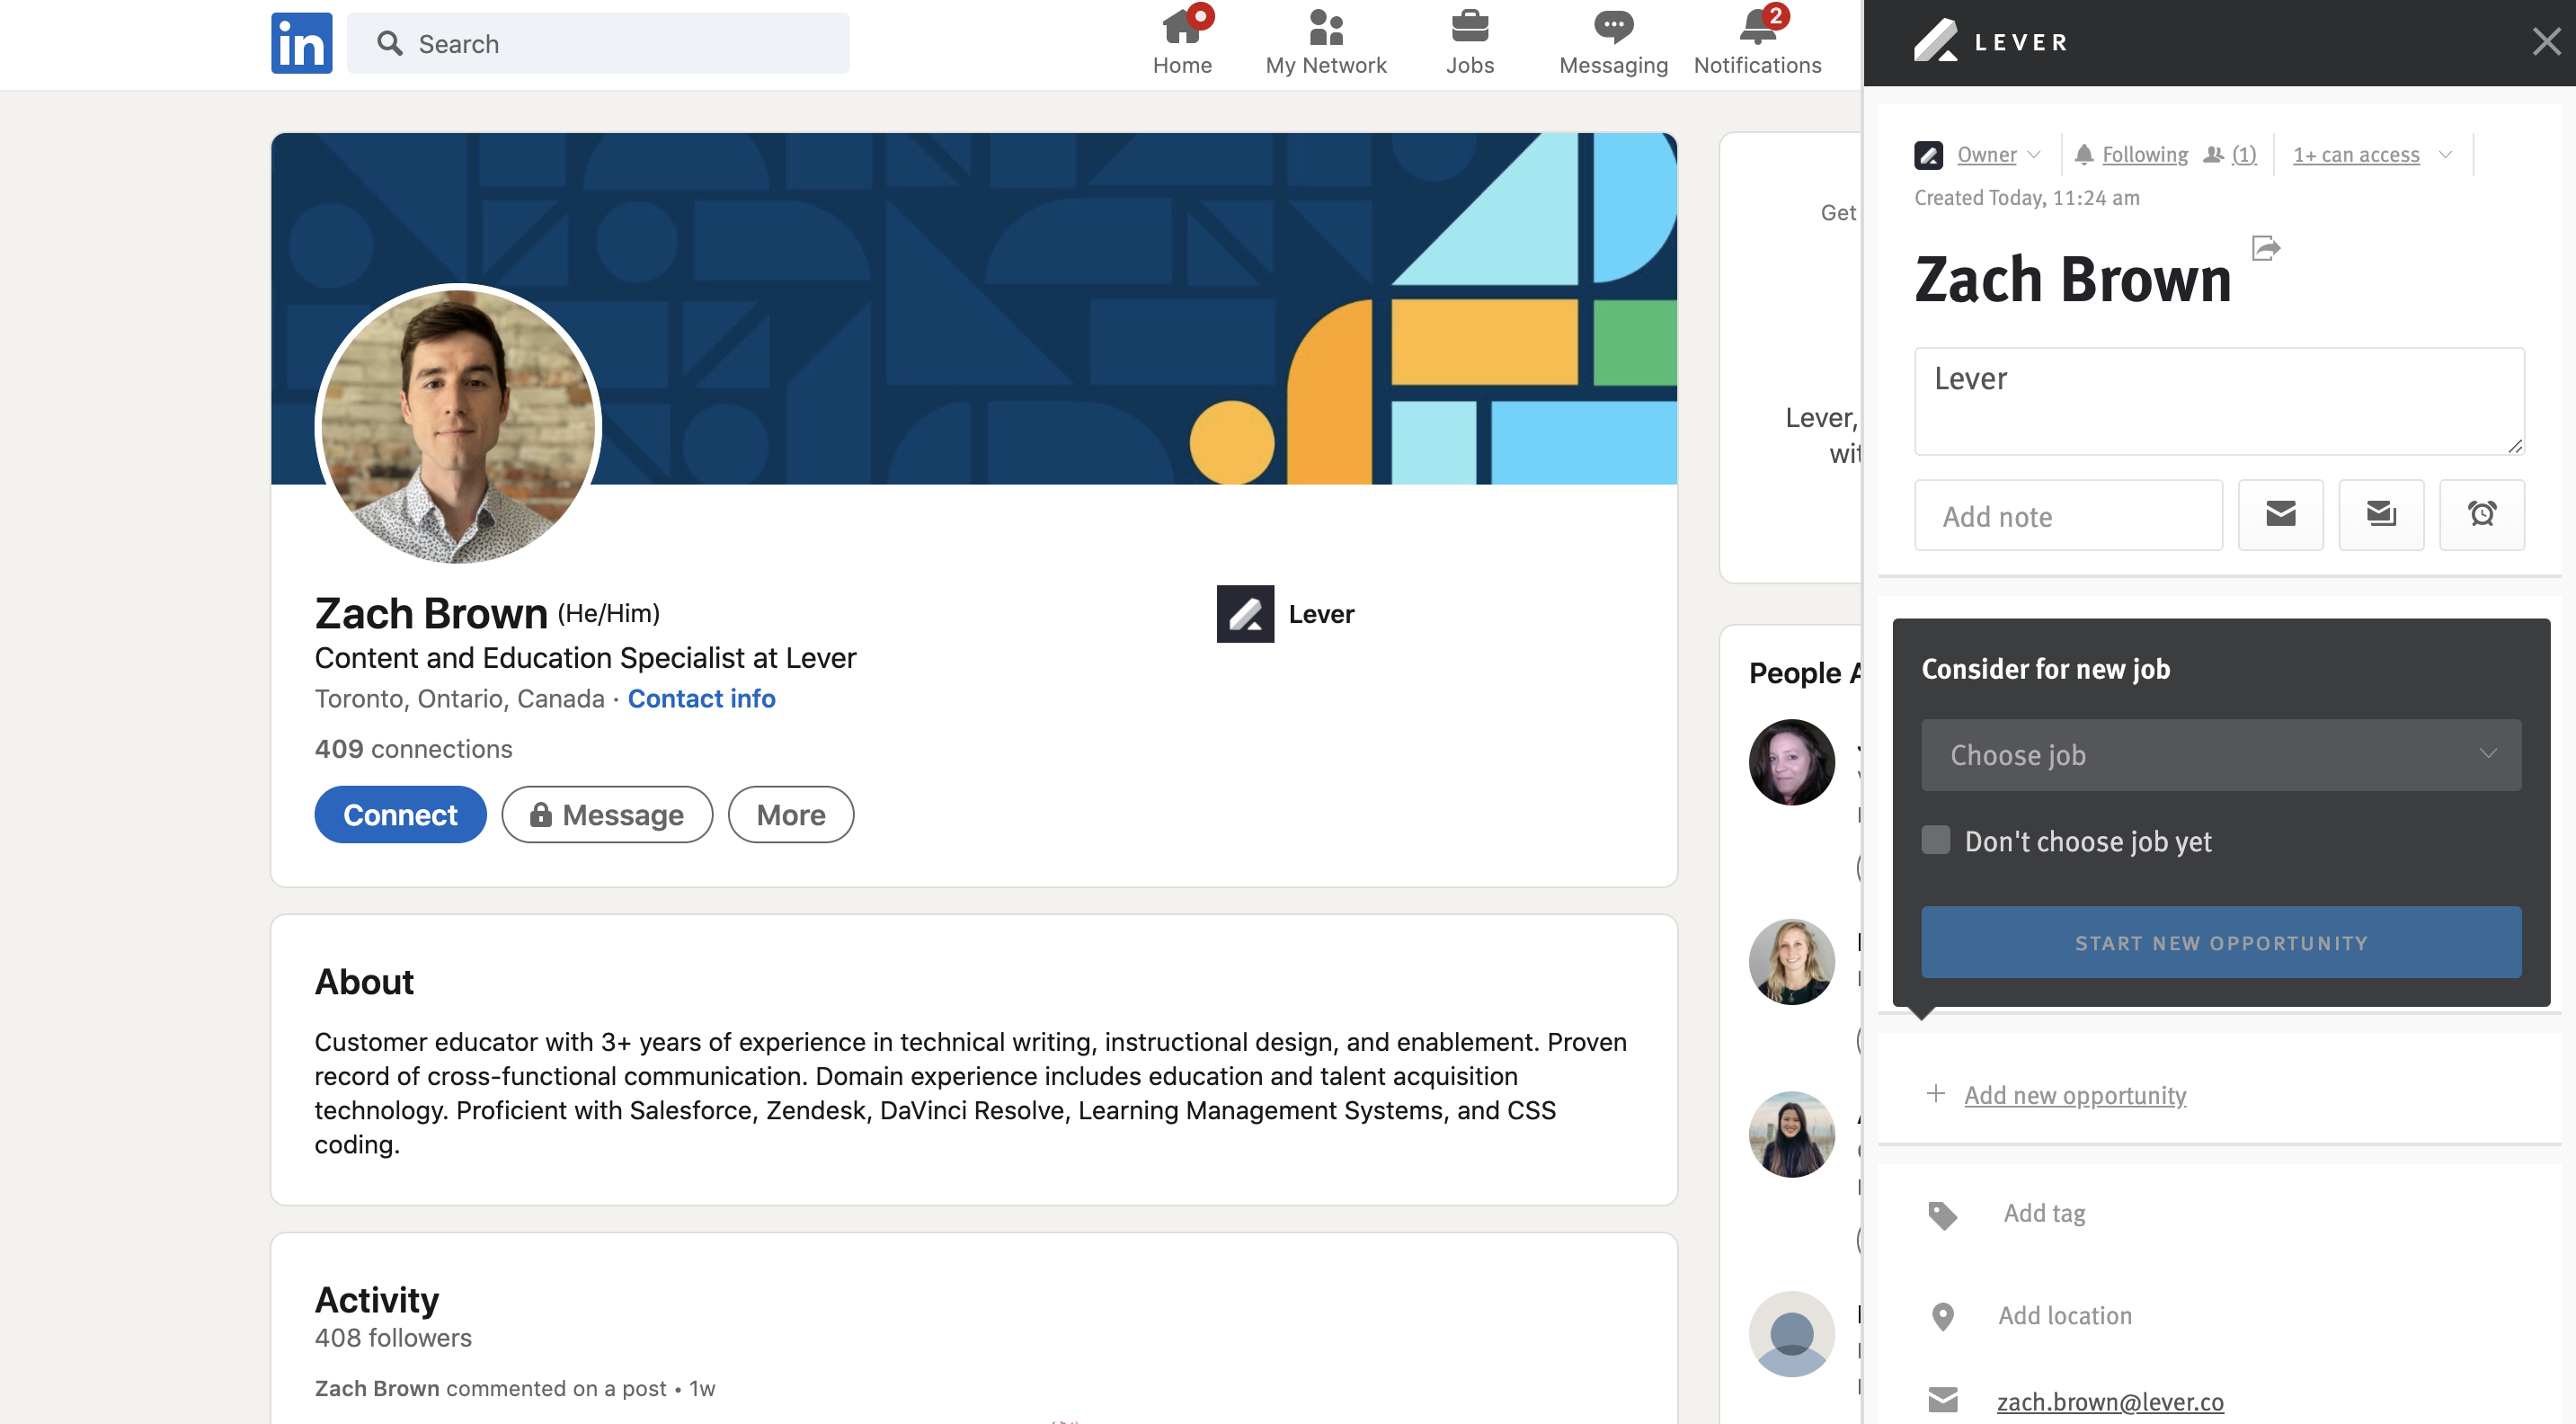 LinkedIn profile open in Chrome browser window with Lever Chrome extension expanded showing existing candidate profile and posting picker menu in pop-up extending from Add new opportunity button.